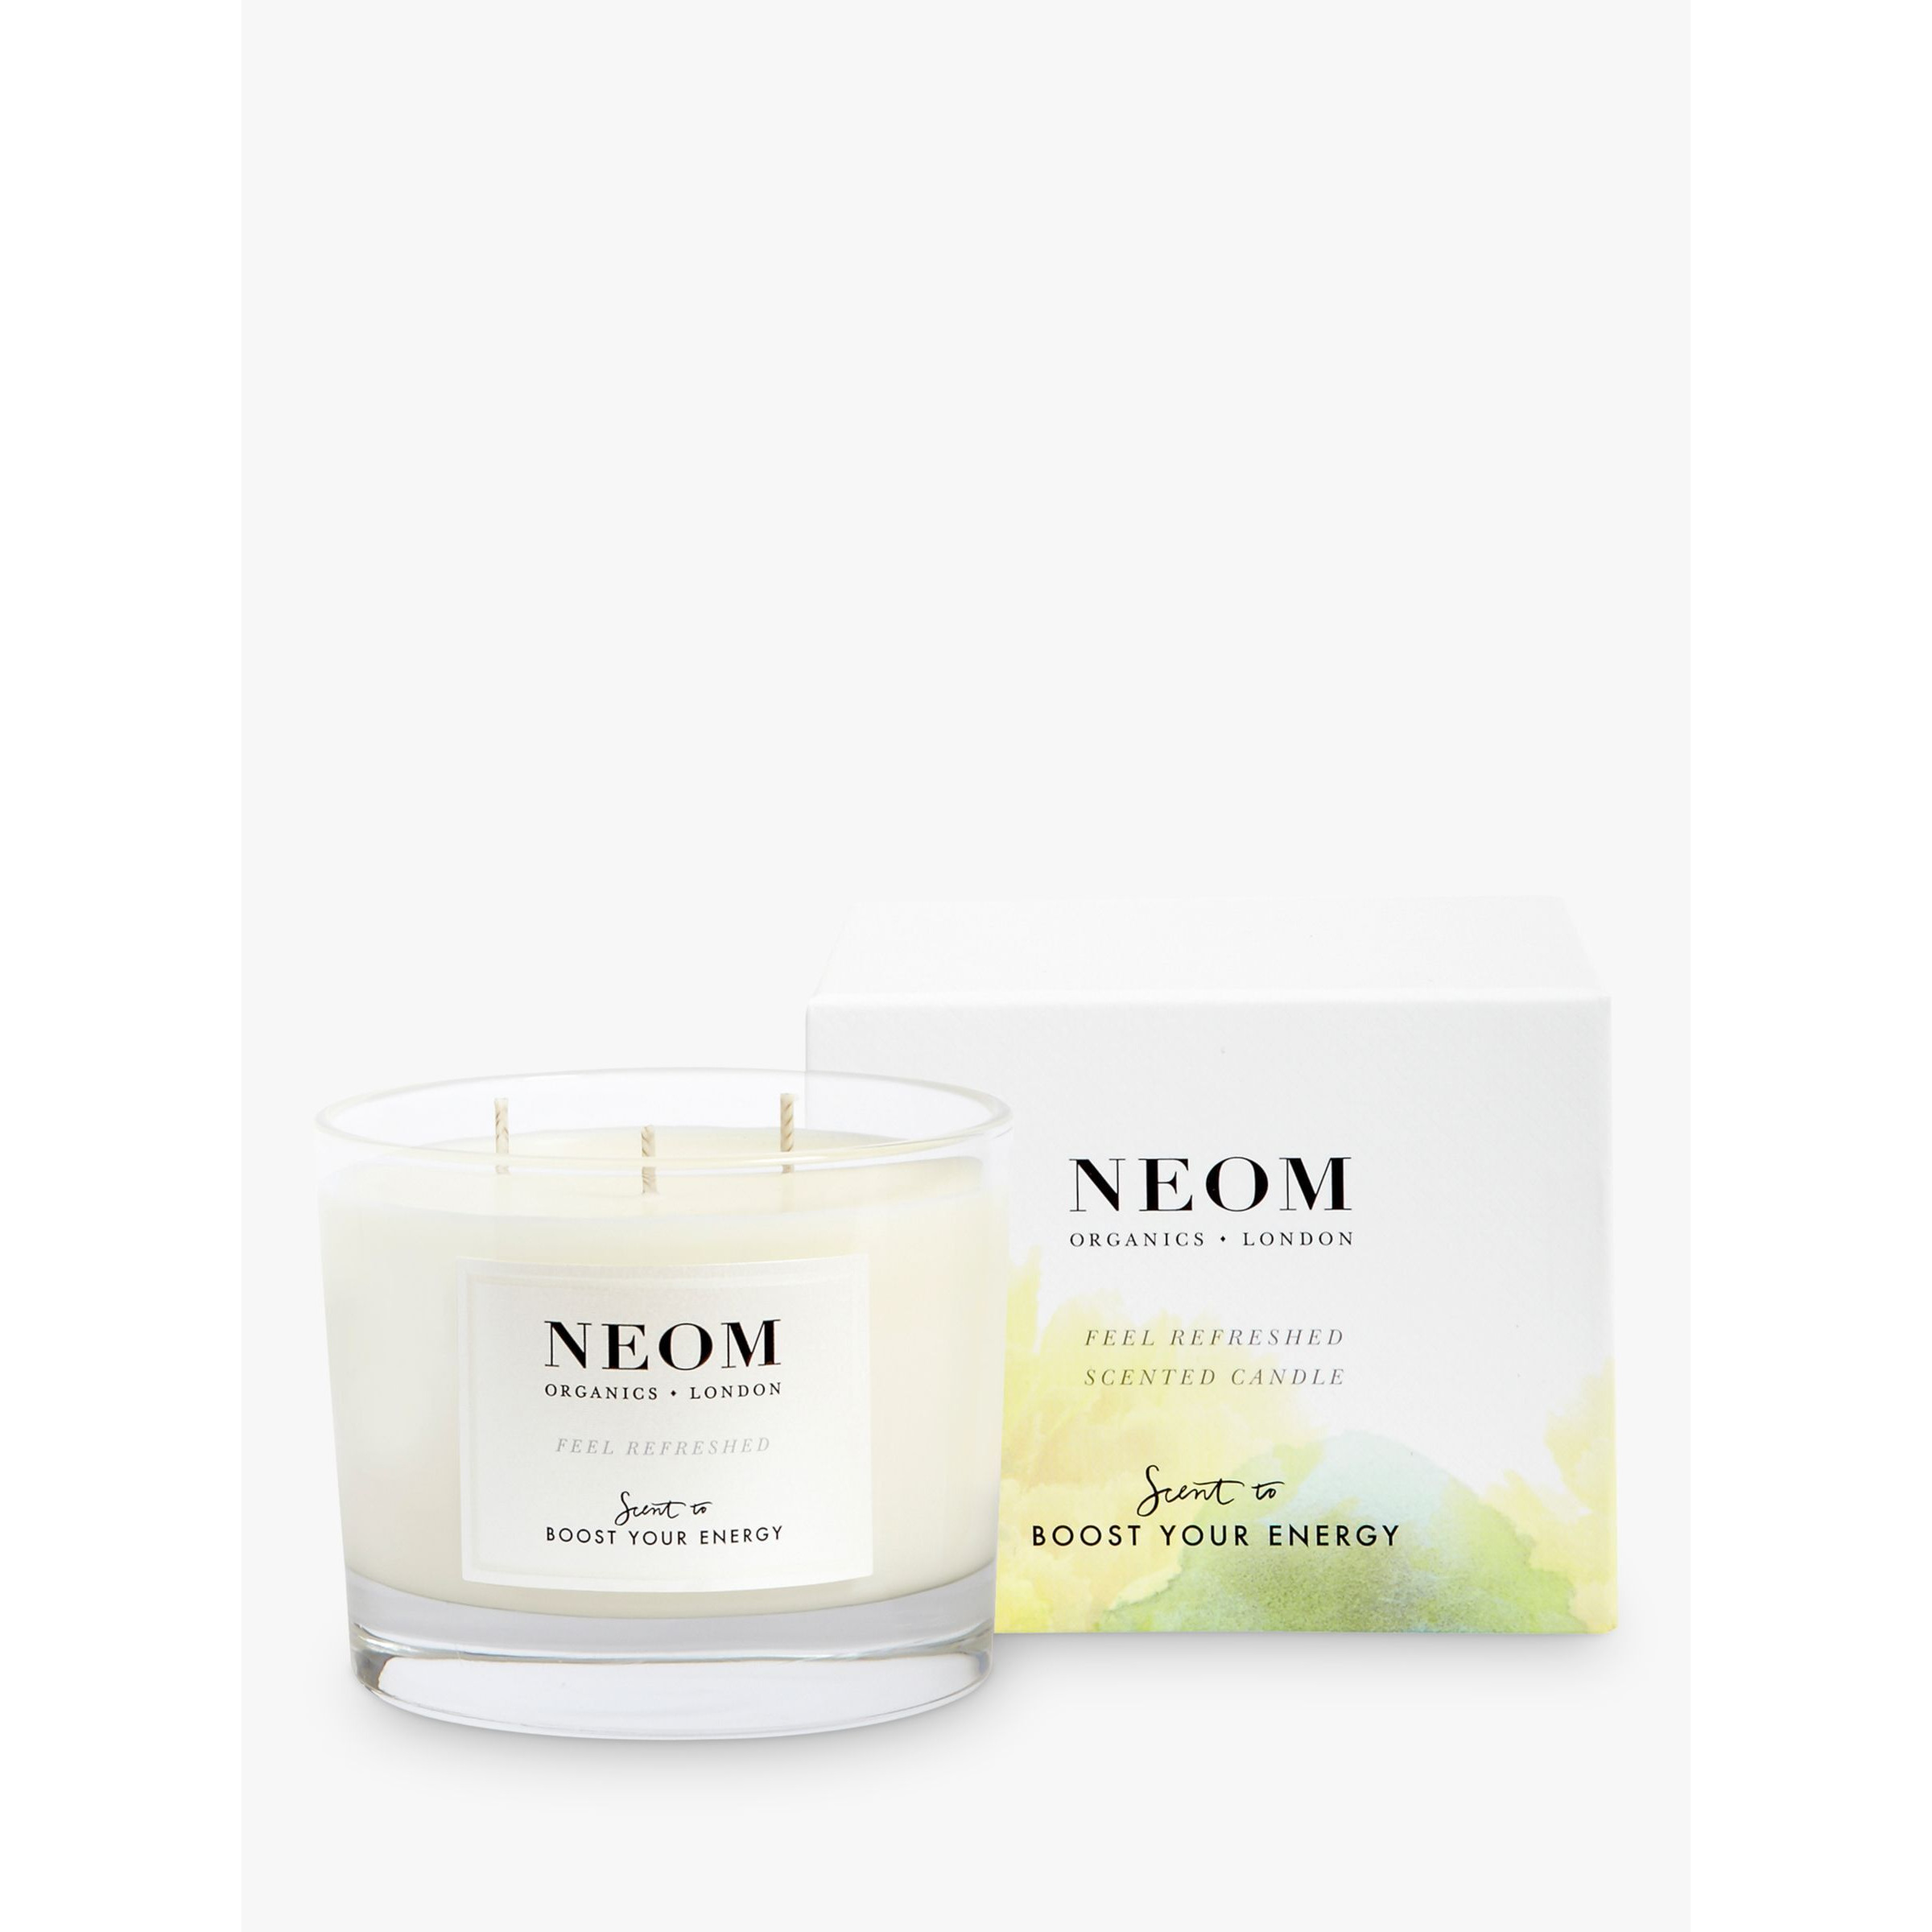 Neom Organics London Feel Refreshed 3 Wick Scented Candle - image 1